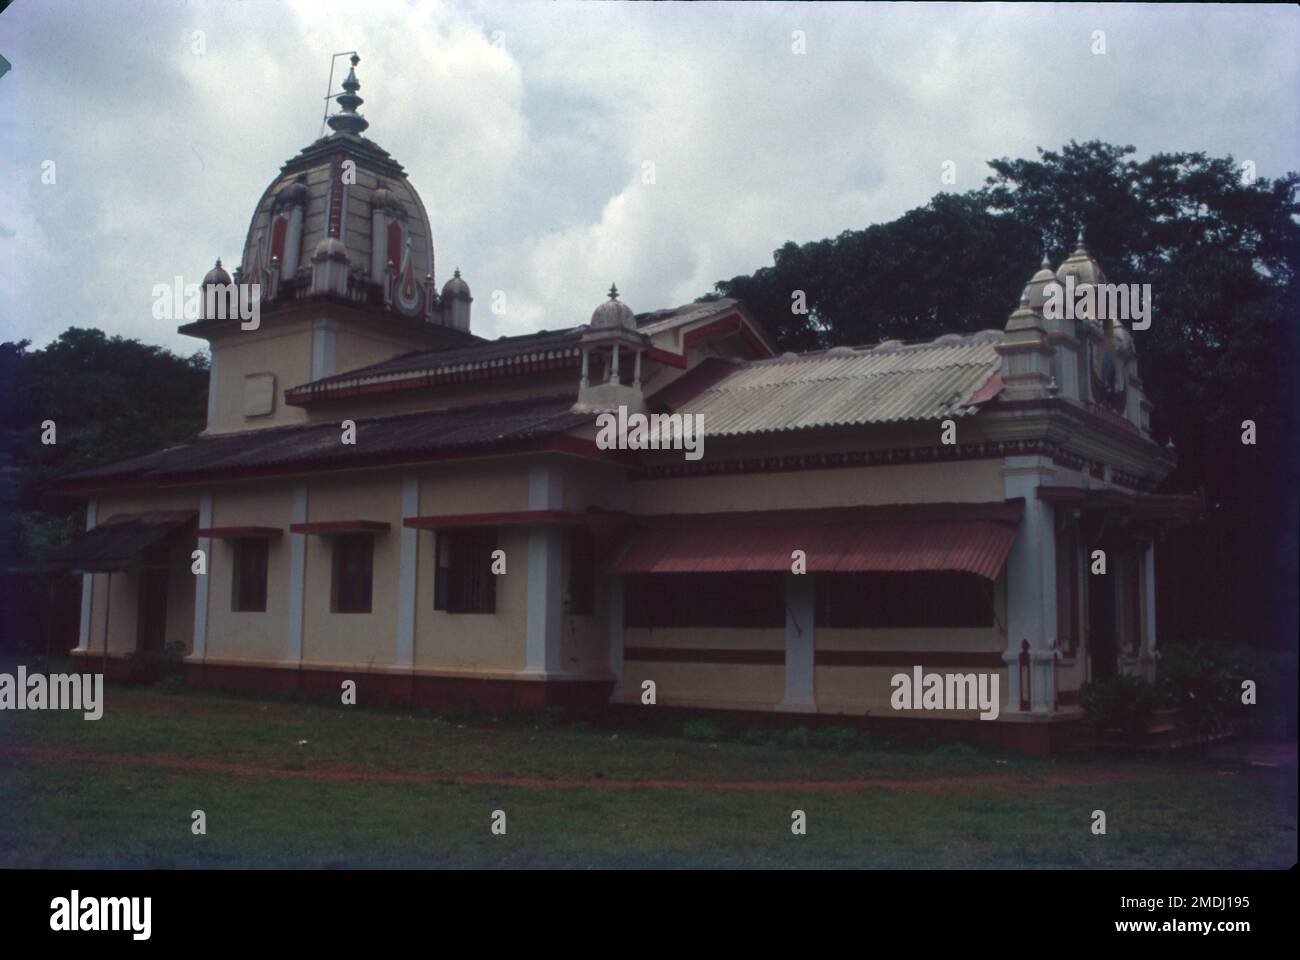 The Shri Ganesh temple also known as the Shri Gopal Ganapati temple is situated amidst beautiful natural surroundings at Farmagudi in Ponda, Goa. Established in the year 1950, Stock Photo